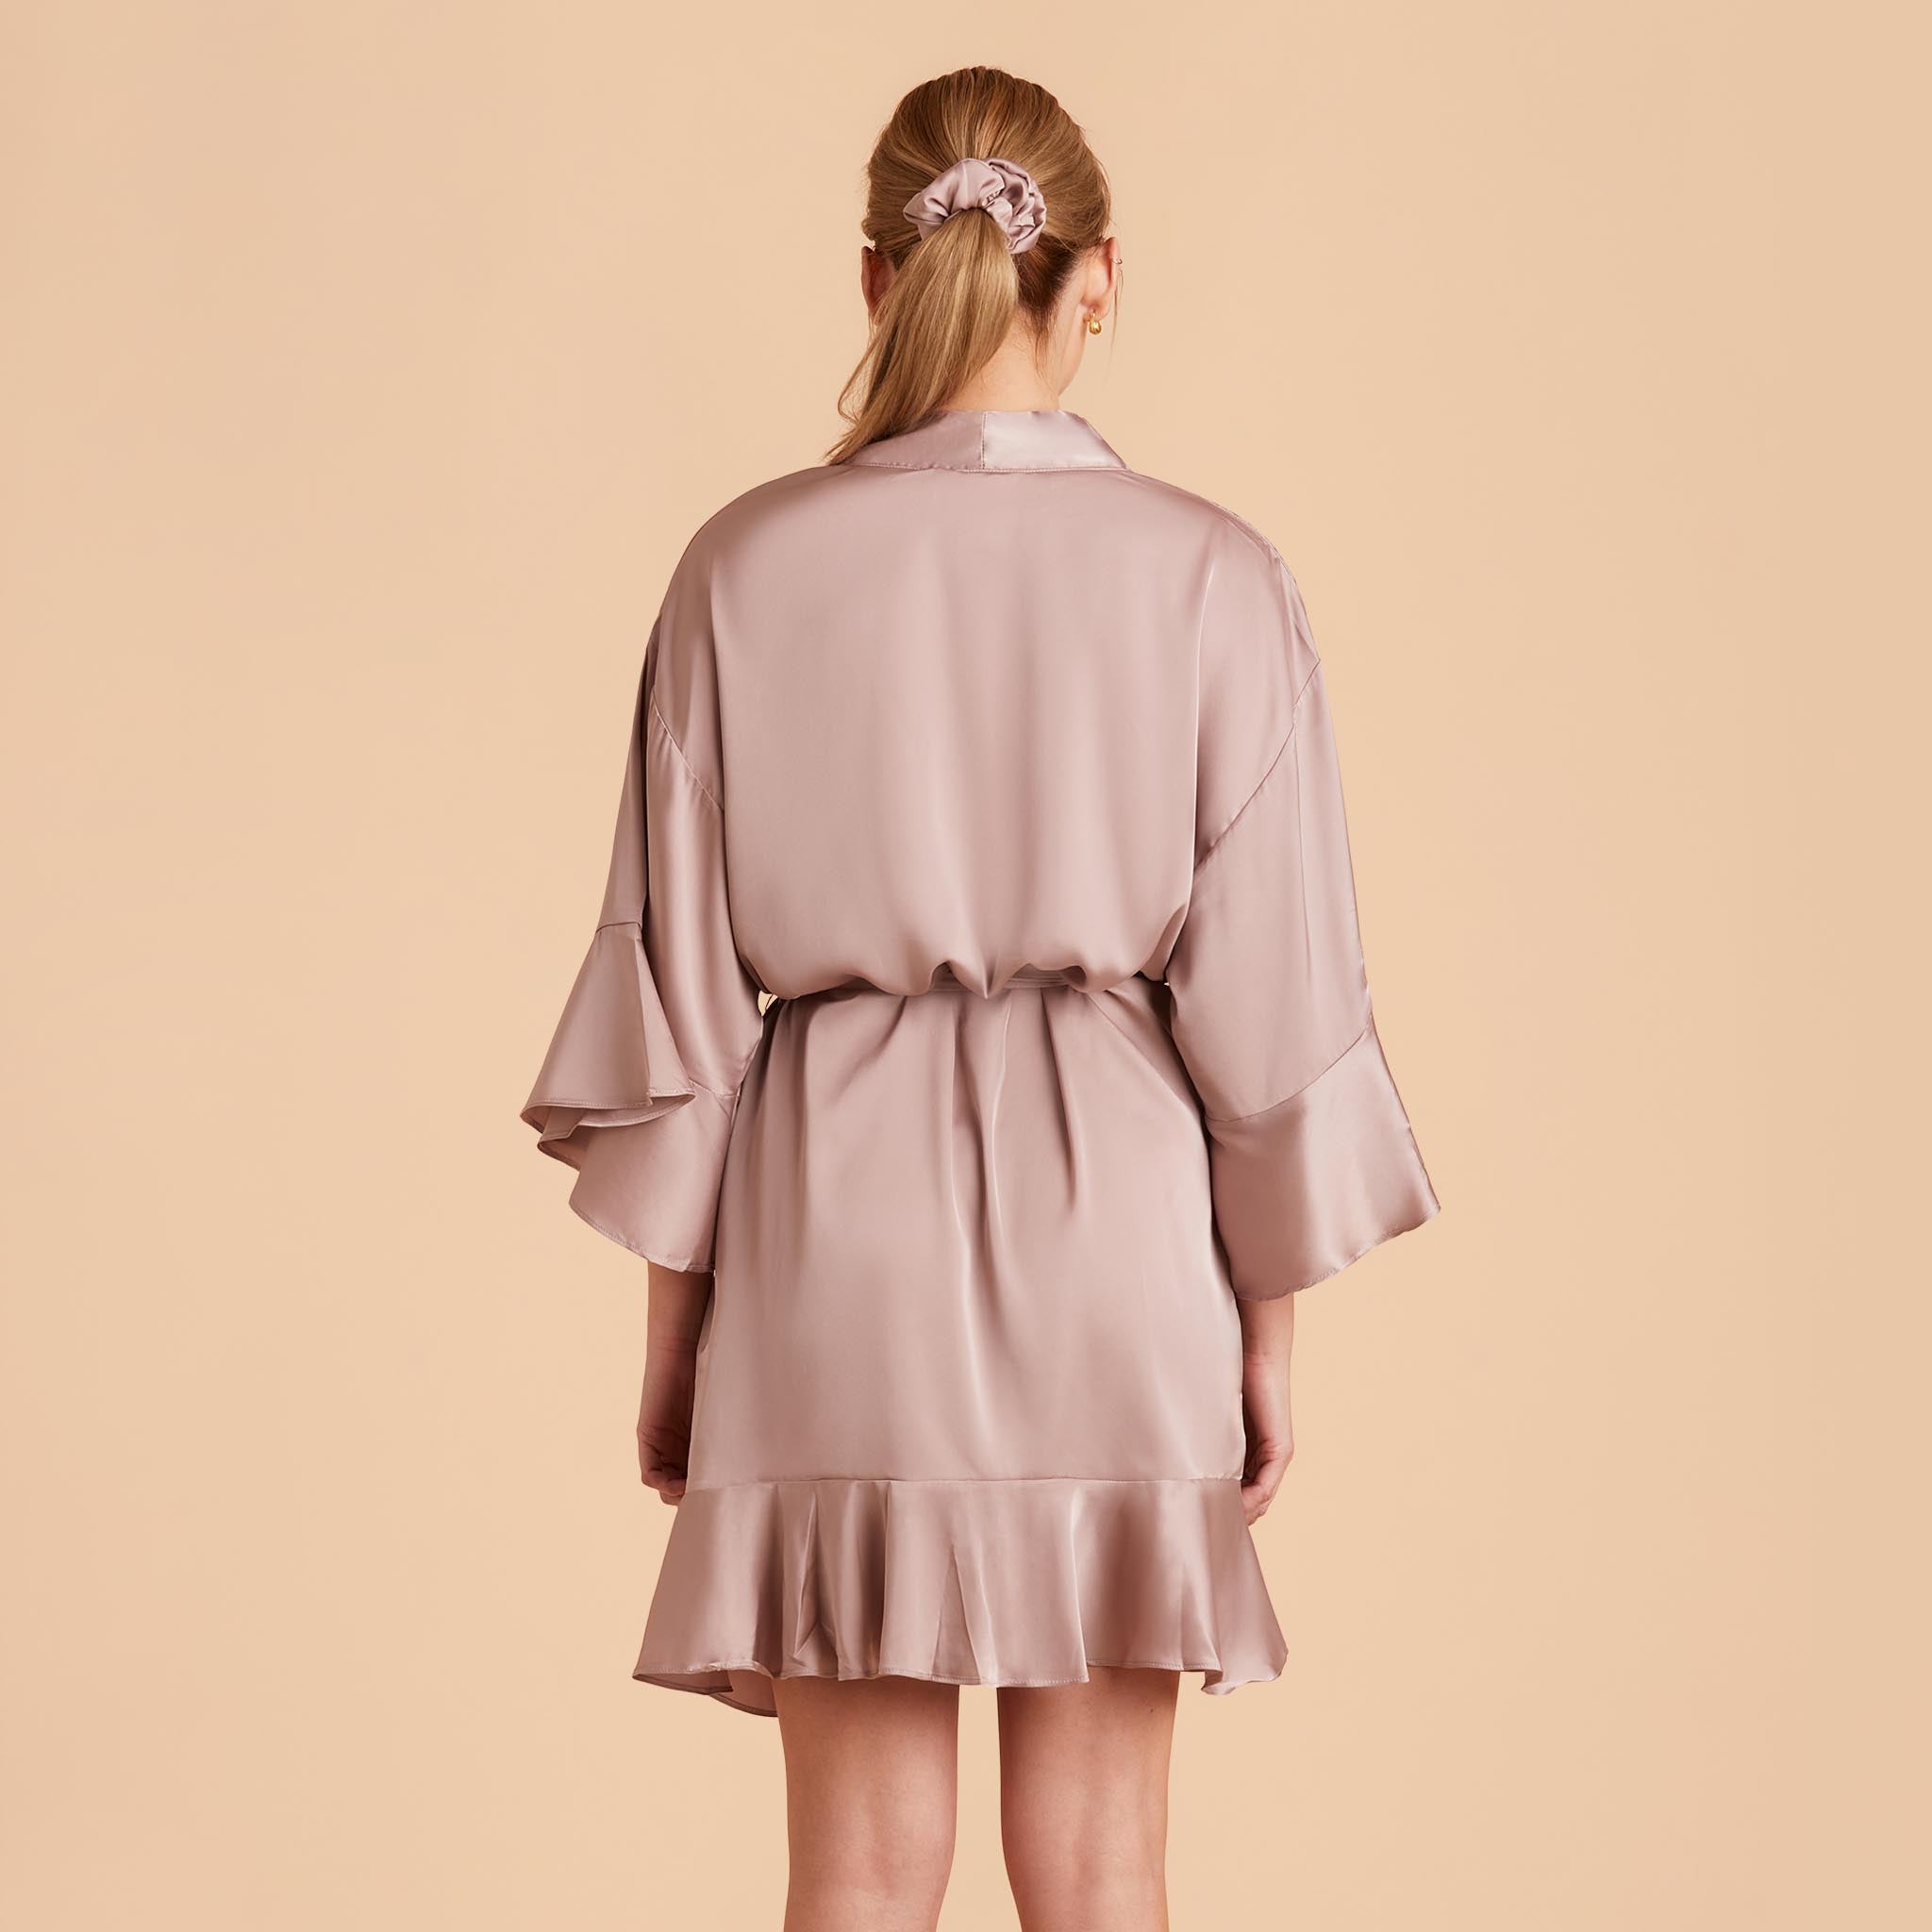 Kenny Ruffle Robe in mauve taupe satin by Birdy Grey, back view